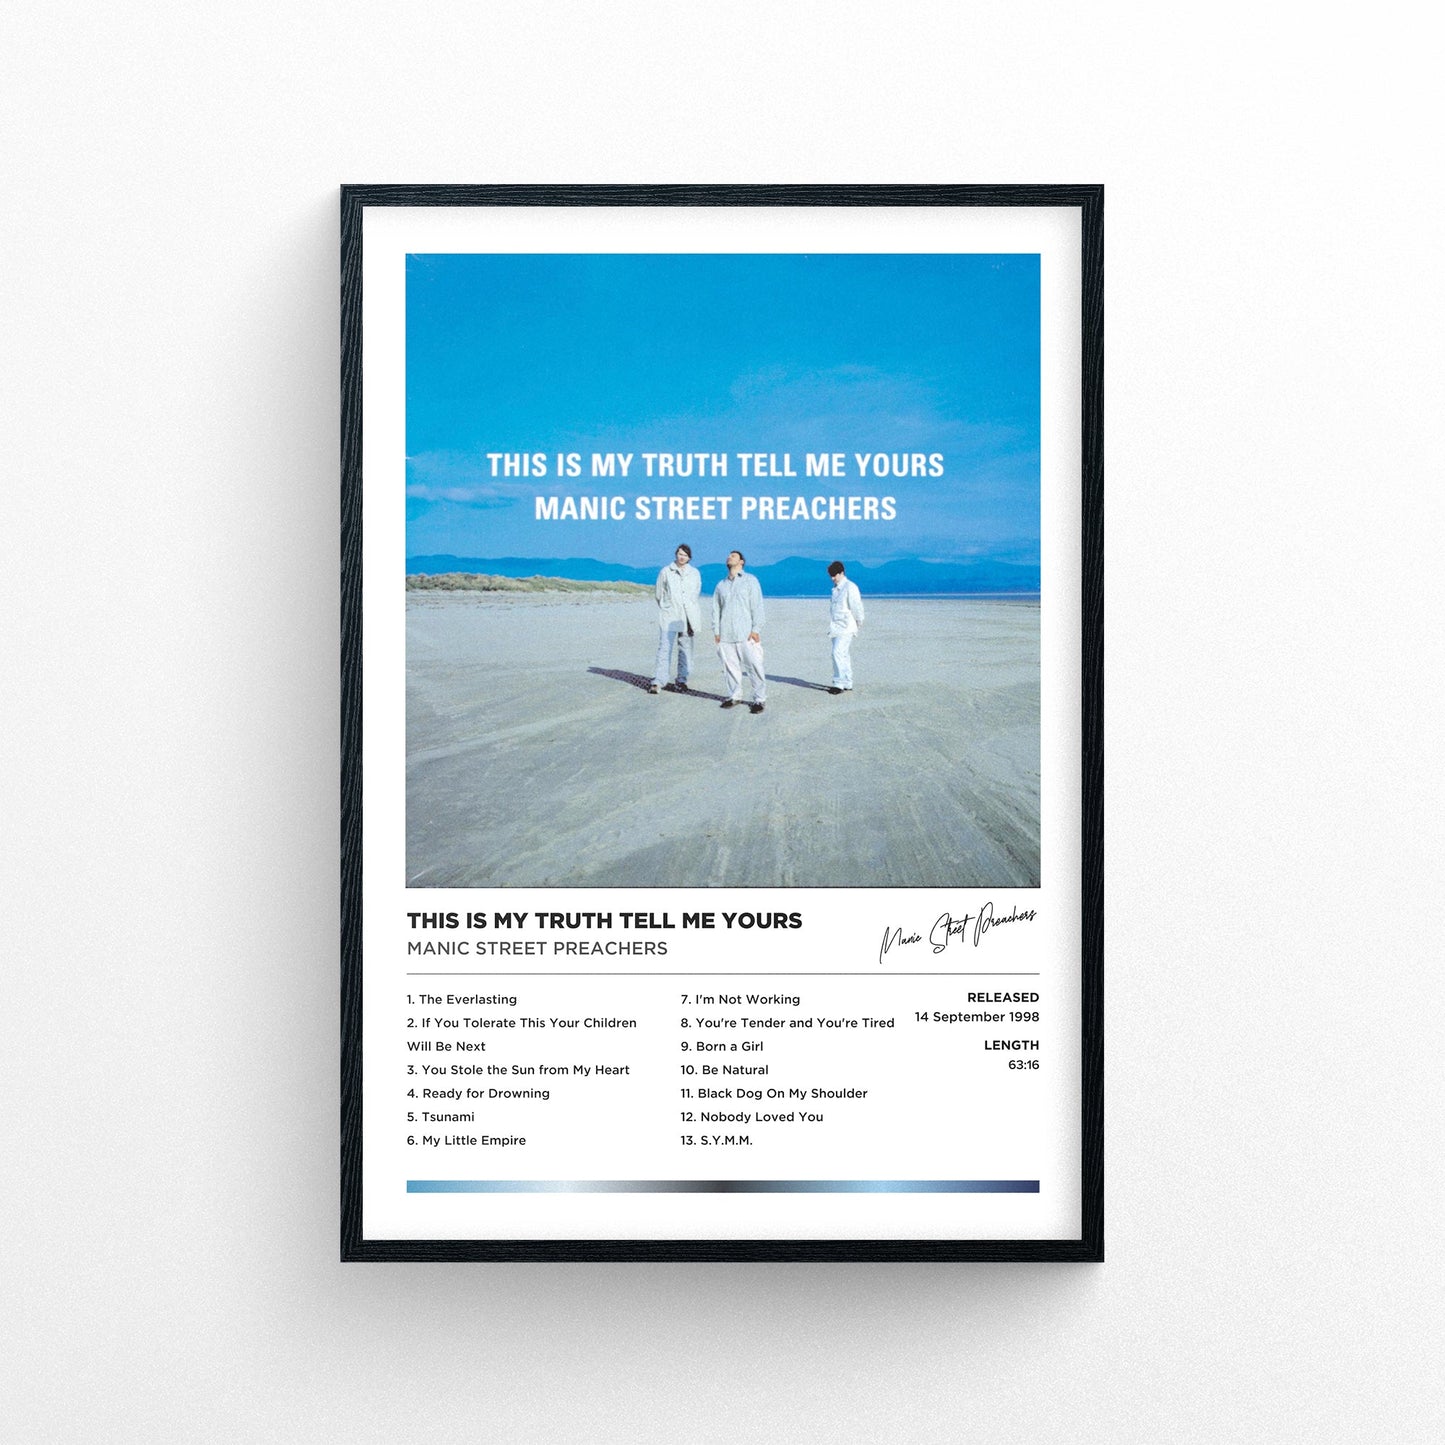 Manic Street Preachers - This Is My Truth Tell Me Yours Framed Poster Print | Polaroid Style | Album Cover Artwork